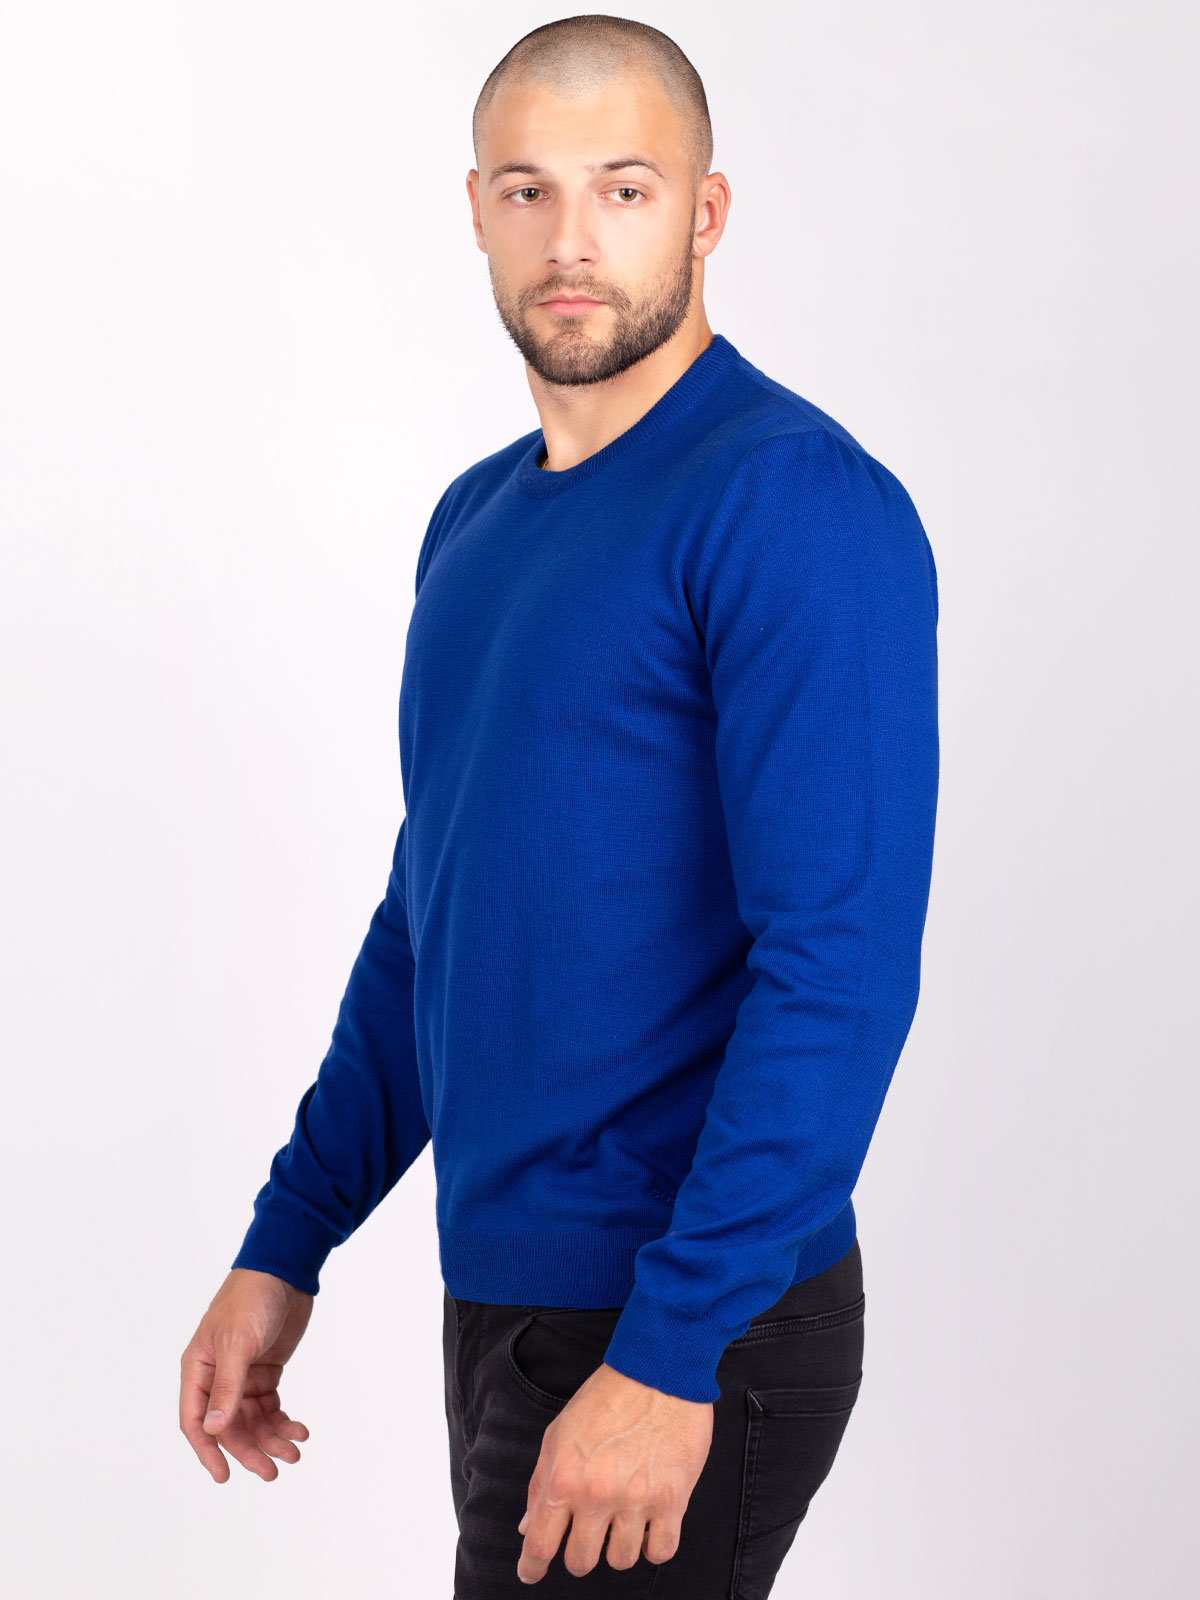 Sweater in parliament blue color - 35300 € 21.93 img2